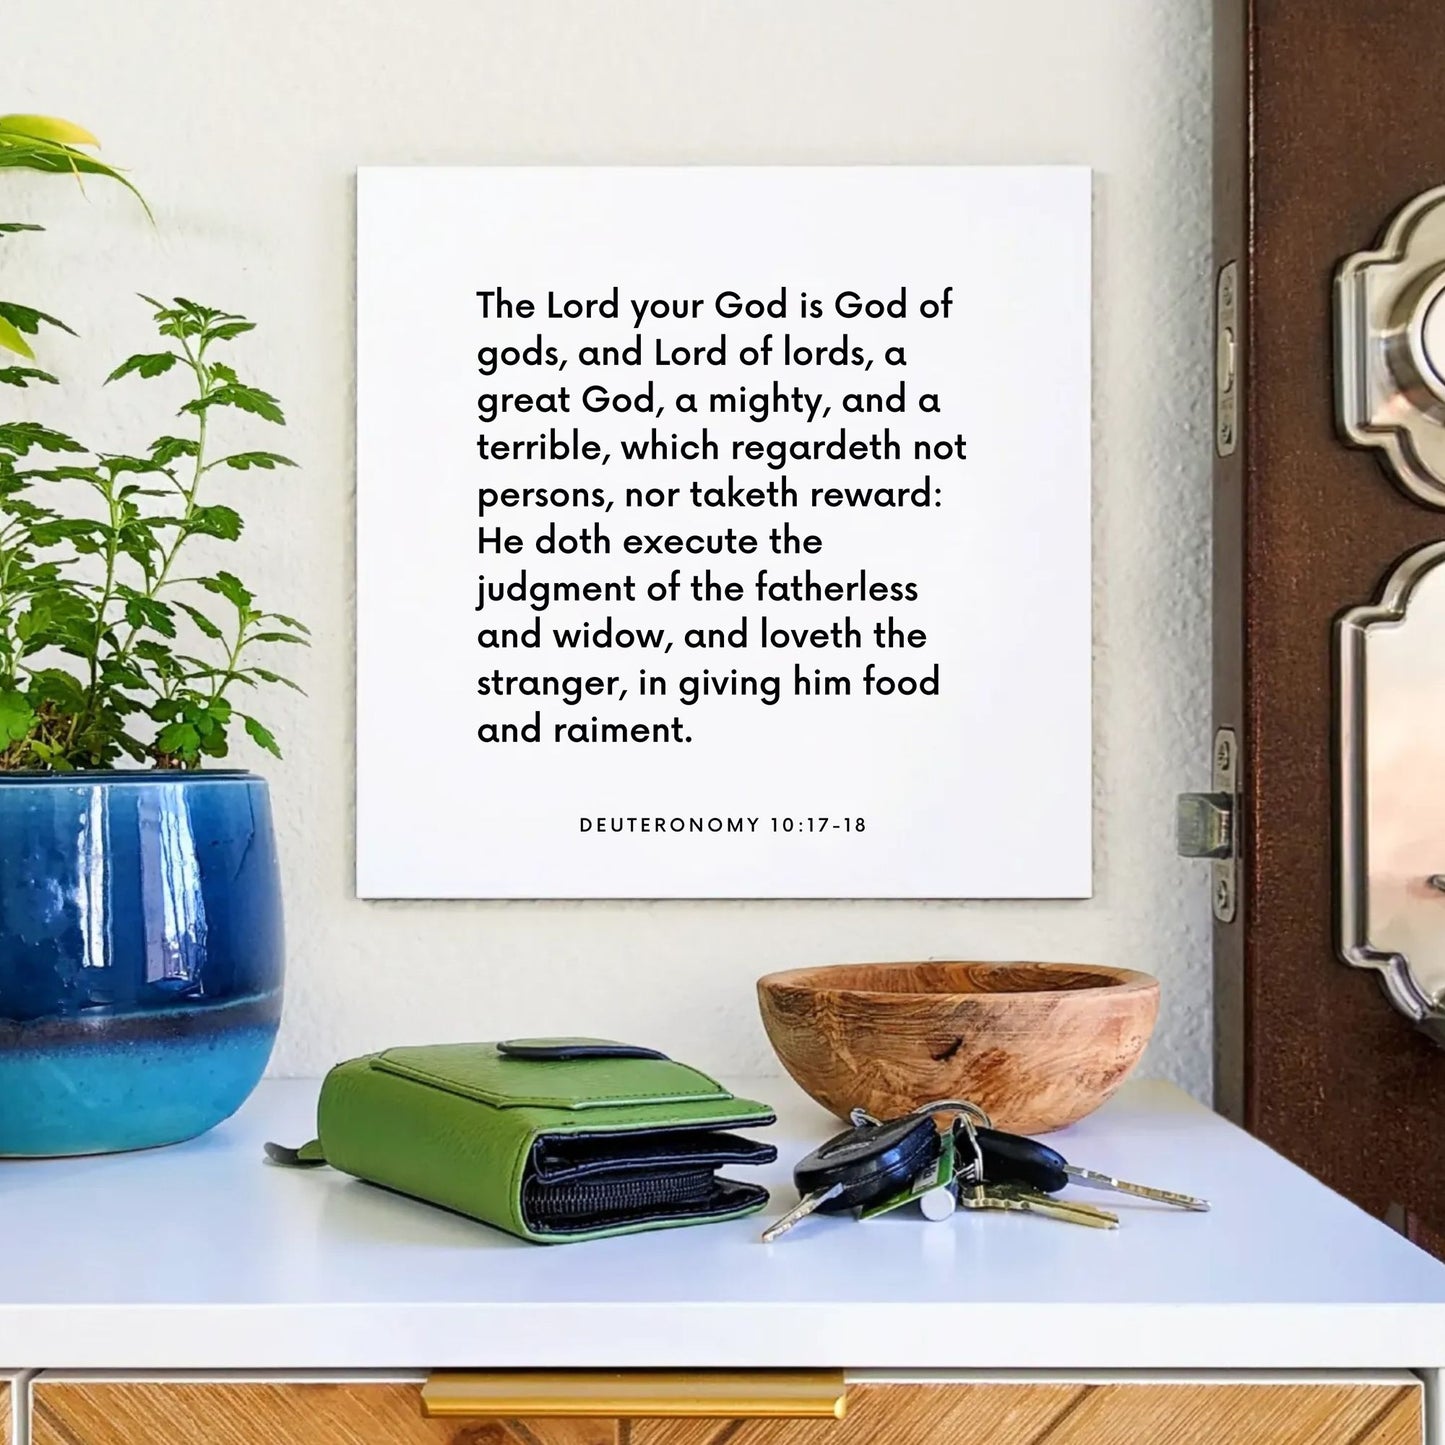 Entryway mouting of the scripture tile for Deuteronomy 10:17-18 - "The Lord your God is God of gods"